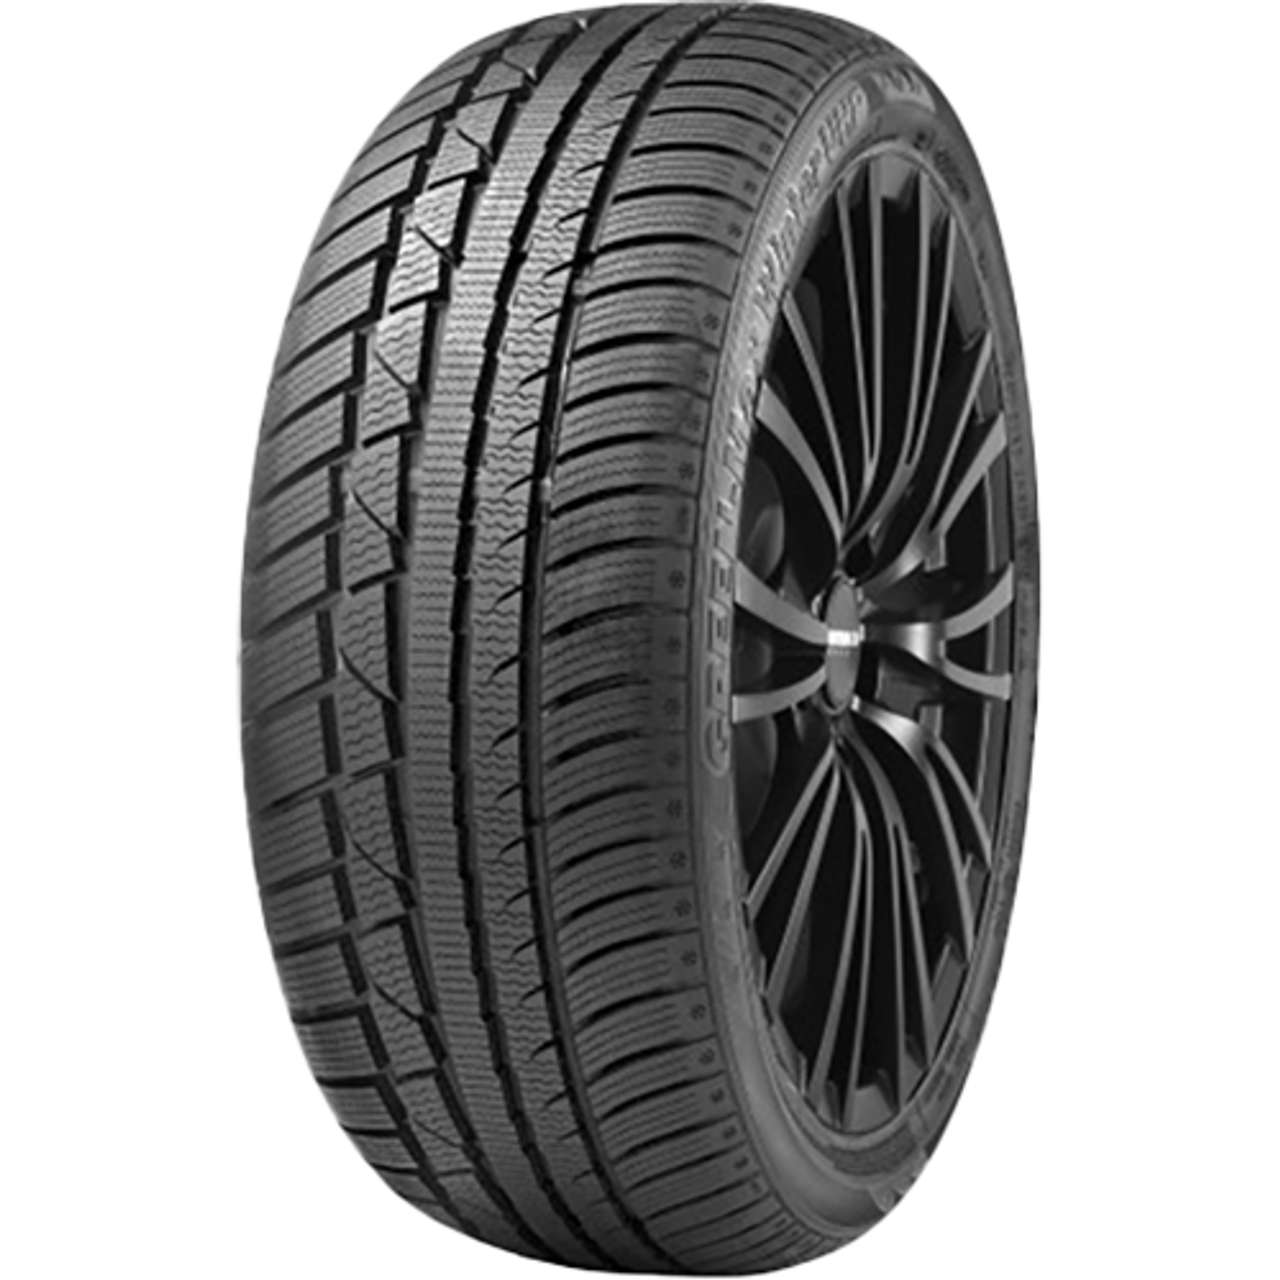 LINGLONG GREEN-MAX WINTER UHP 255/40R19 100V MFS BSW XL